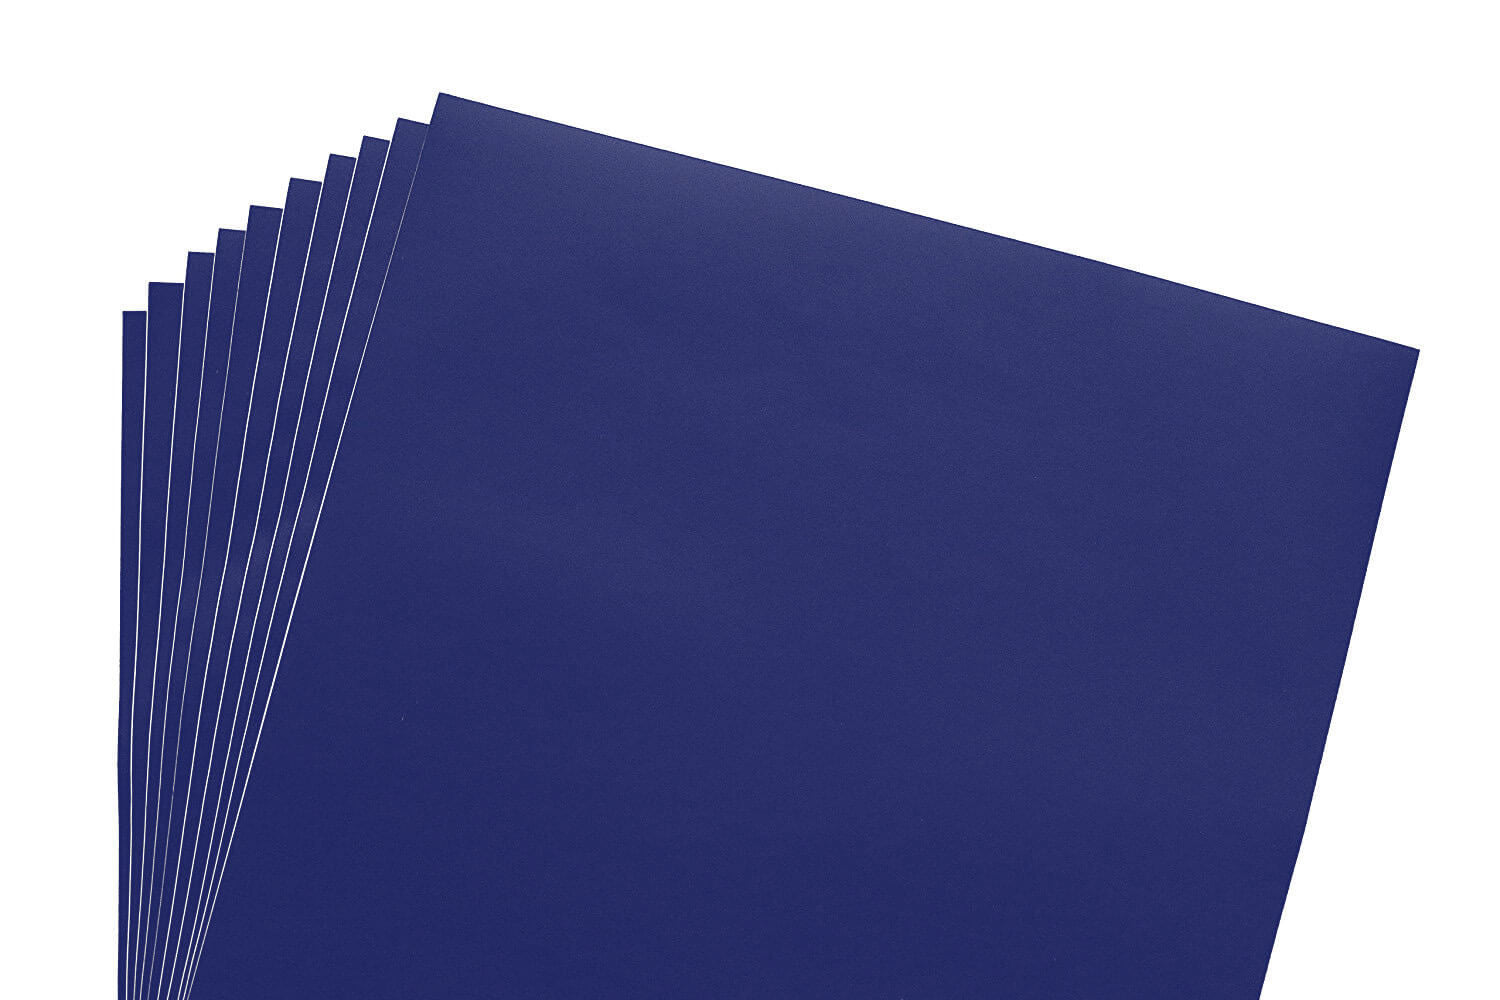 Permanent Adhesive Vinyl Sheets Navy Blue Matte by Scraft Artise